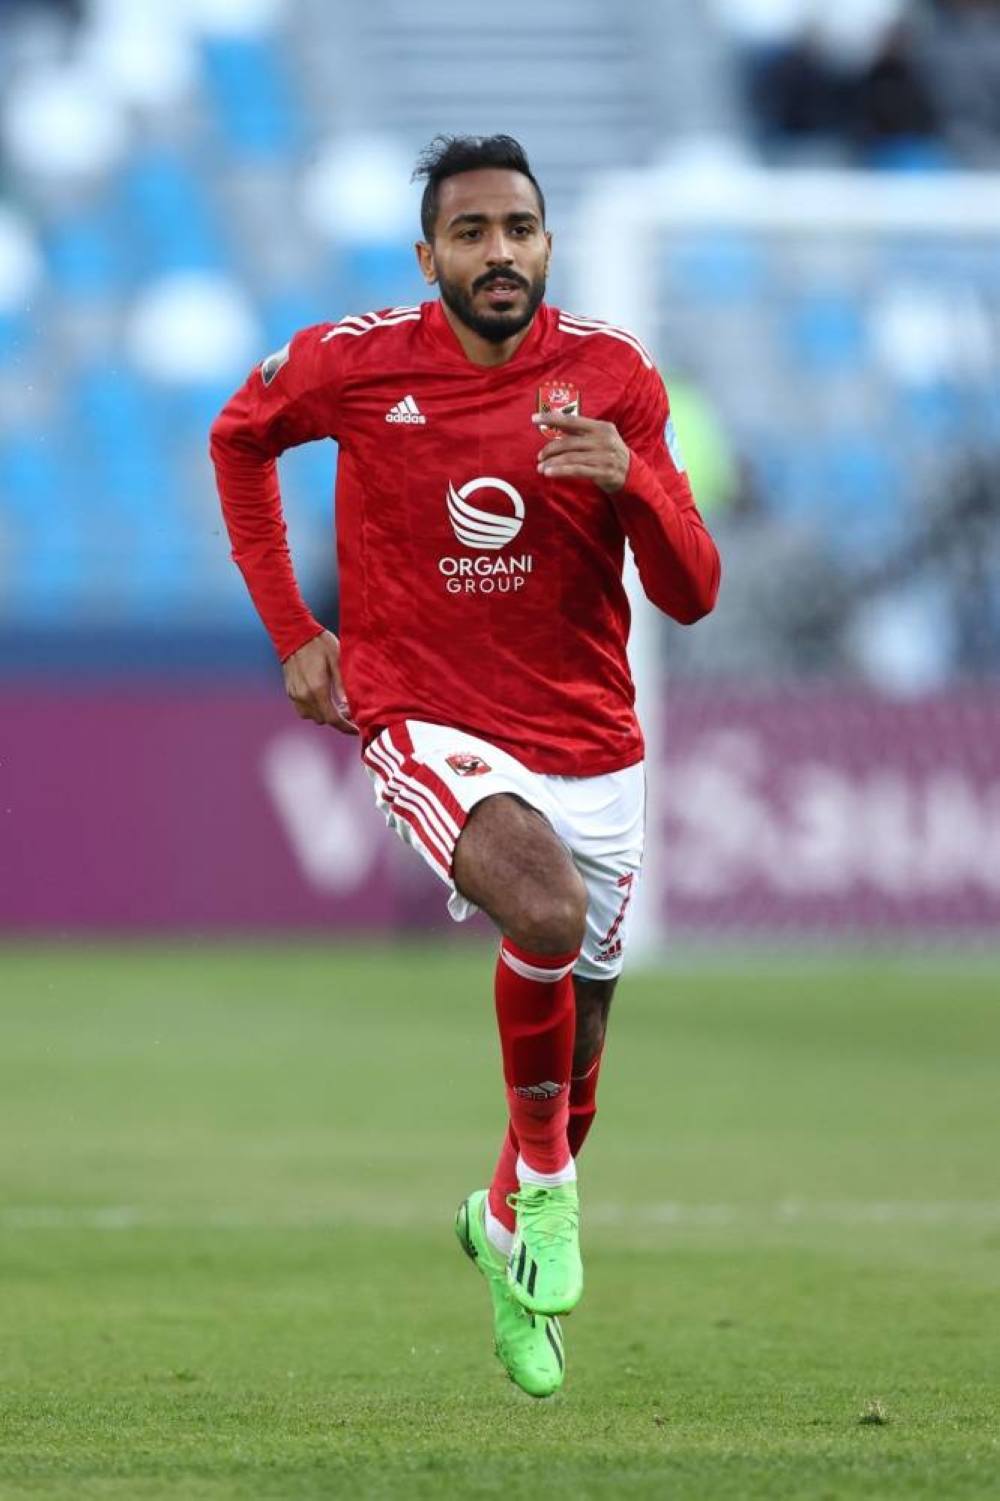 TANGER MED, MOROCCO - FEBRUARY 04: Kahraba of Al Ahly during the FIFA Club World Cup Morocco 2022 2nd Round match between Seattle Sounders FC and Al Ahly FC at Stade Ibn-Batouta on February 4, 2023 in Tanger Med, Morocco. (Photo by James Williamson - AMA/Getty Images)